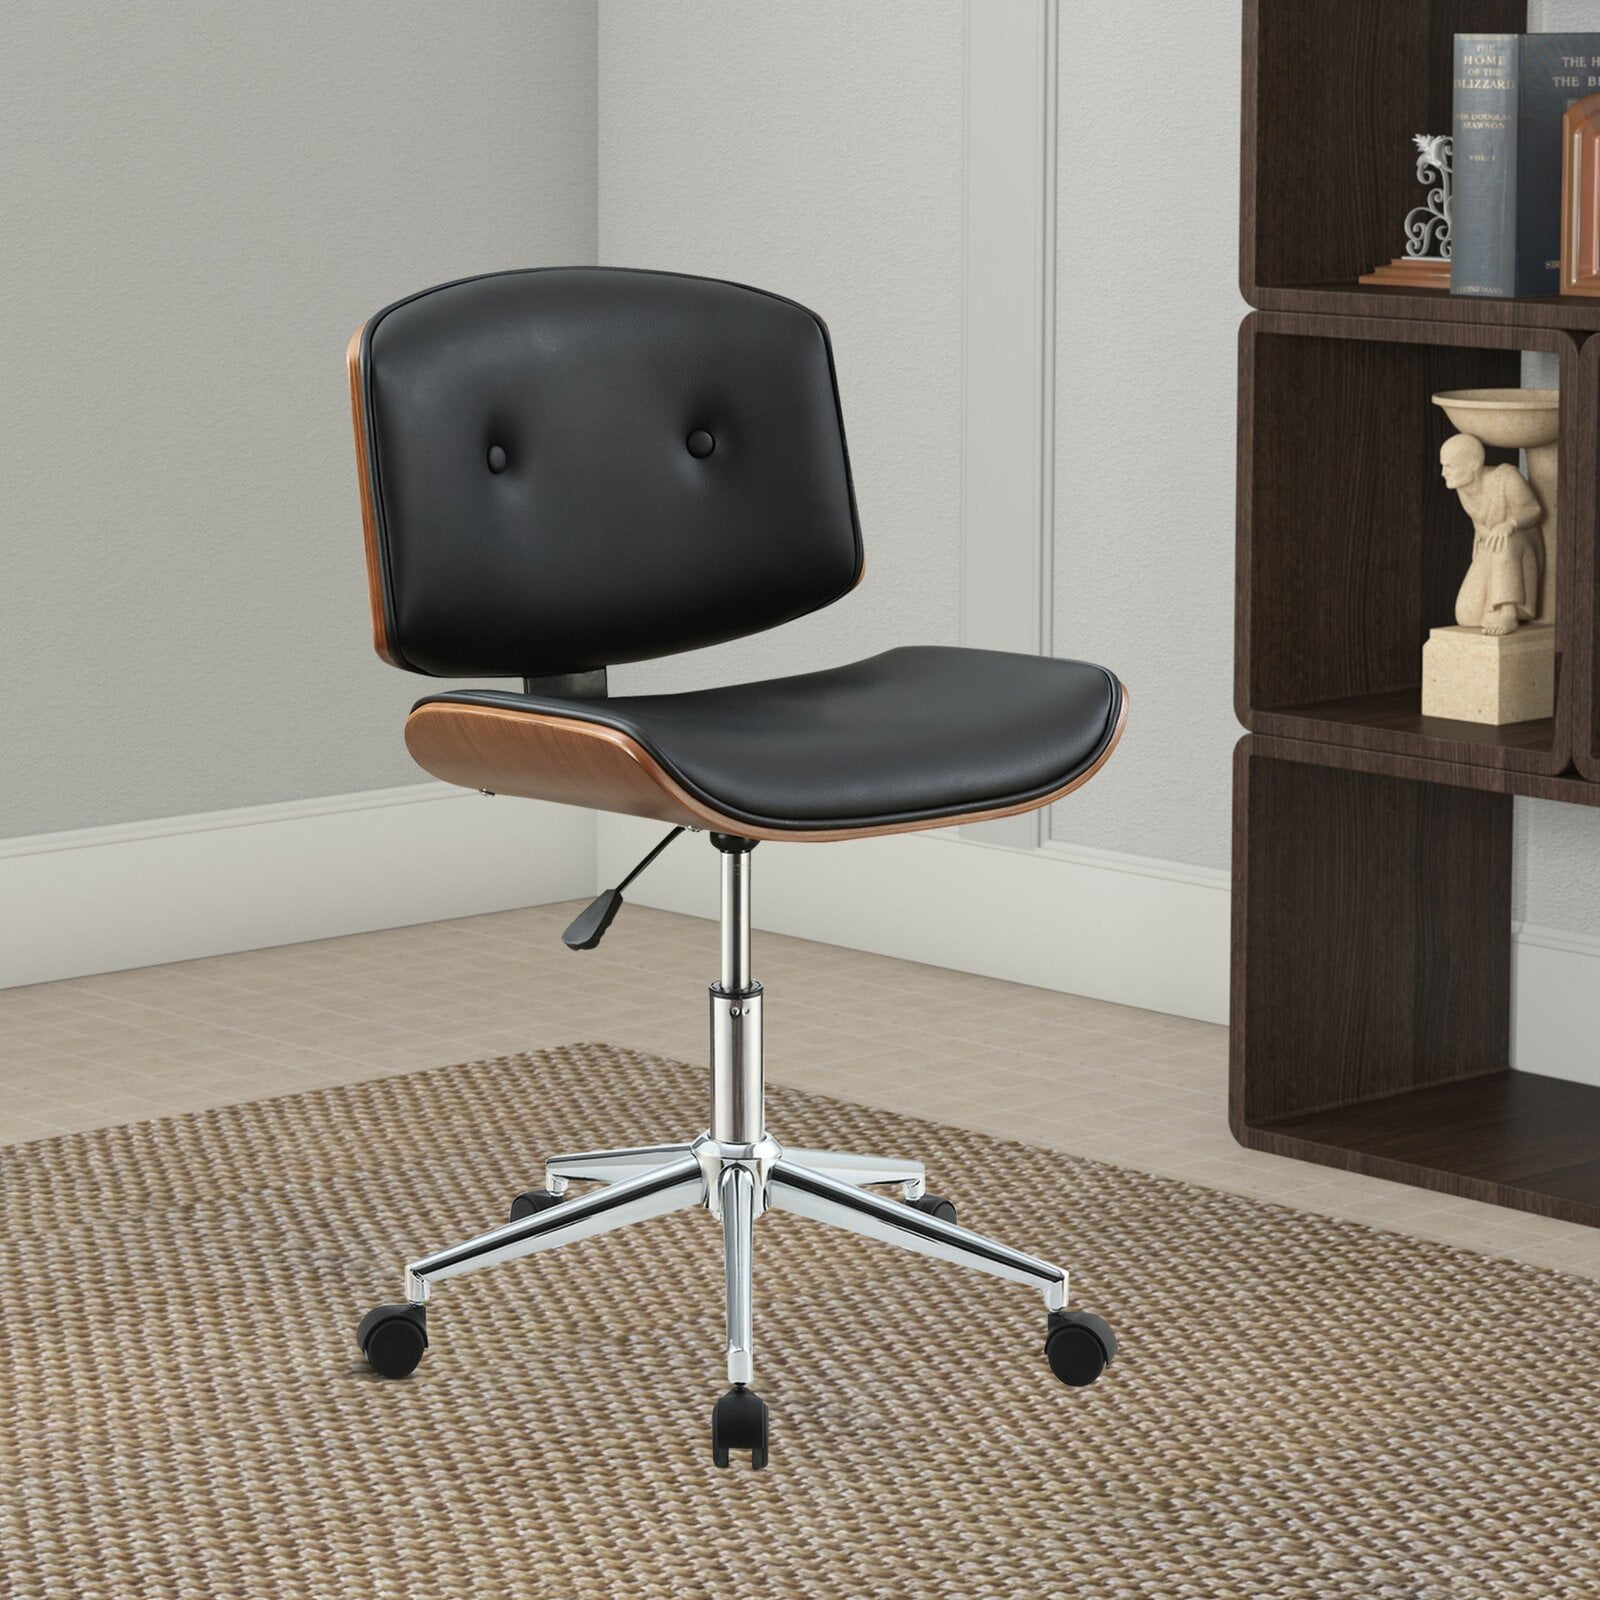 Details about   Brown Flannigan Office Task Chair Workplace Cubicle Swivel Tilt Mechanism New 